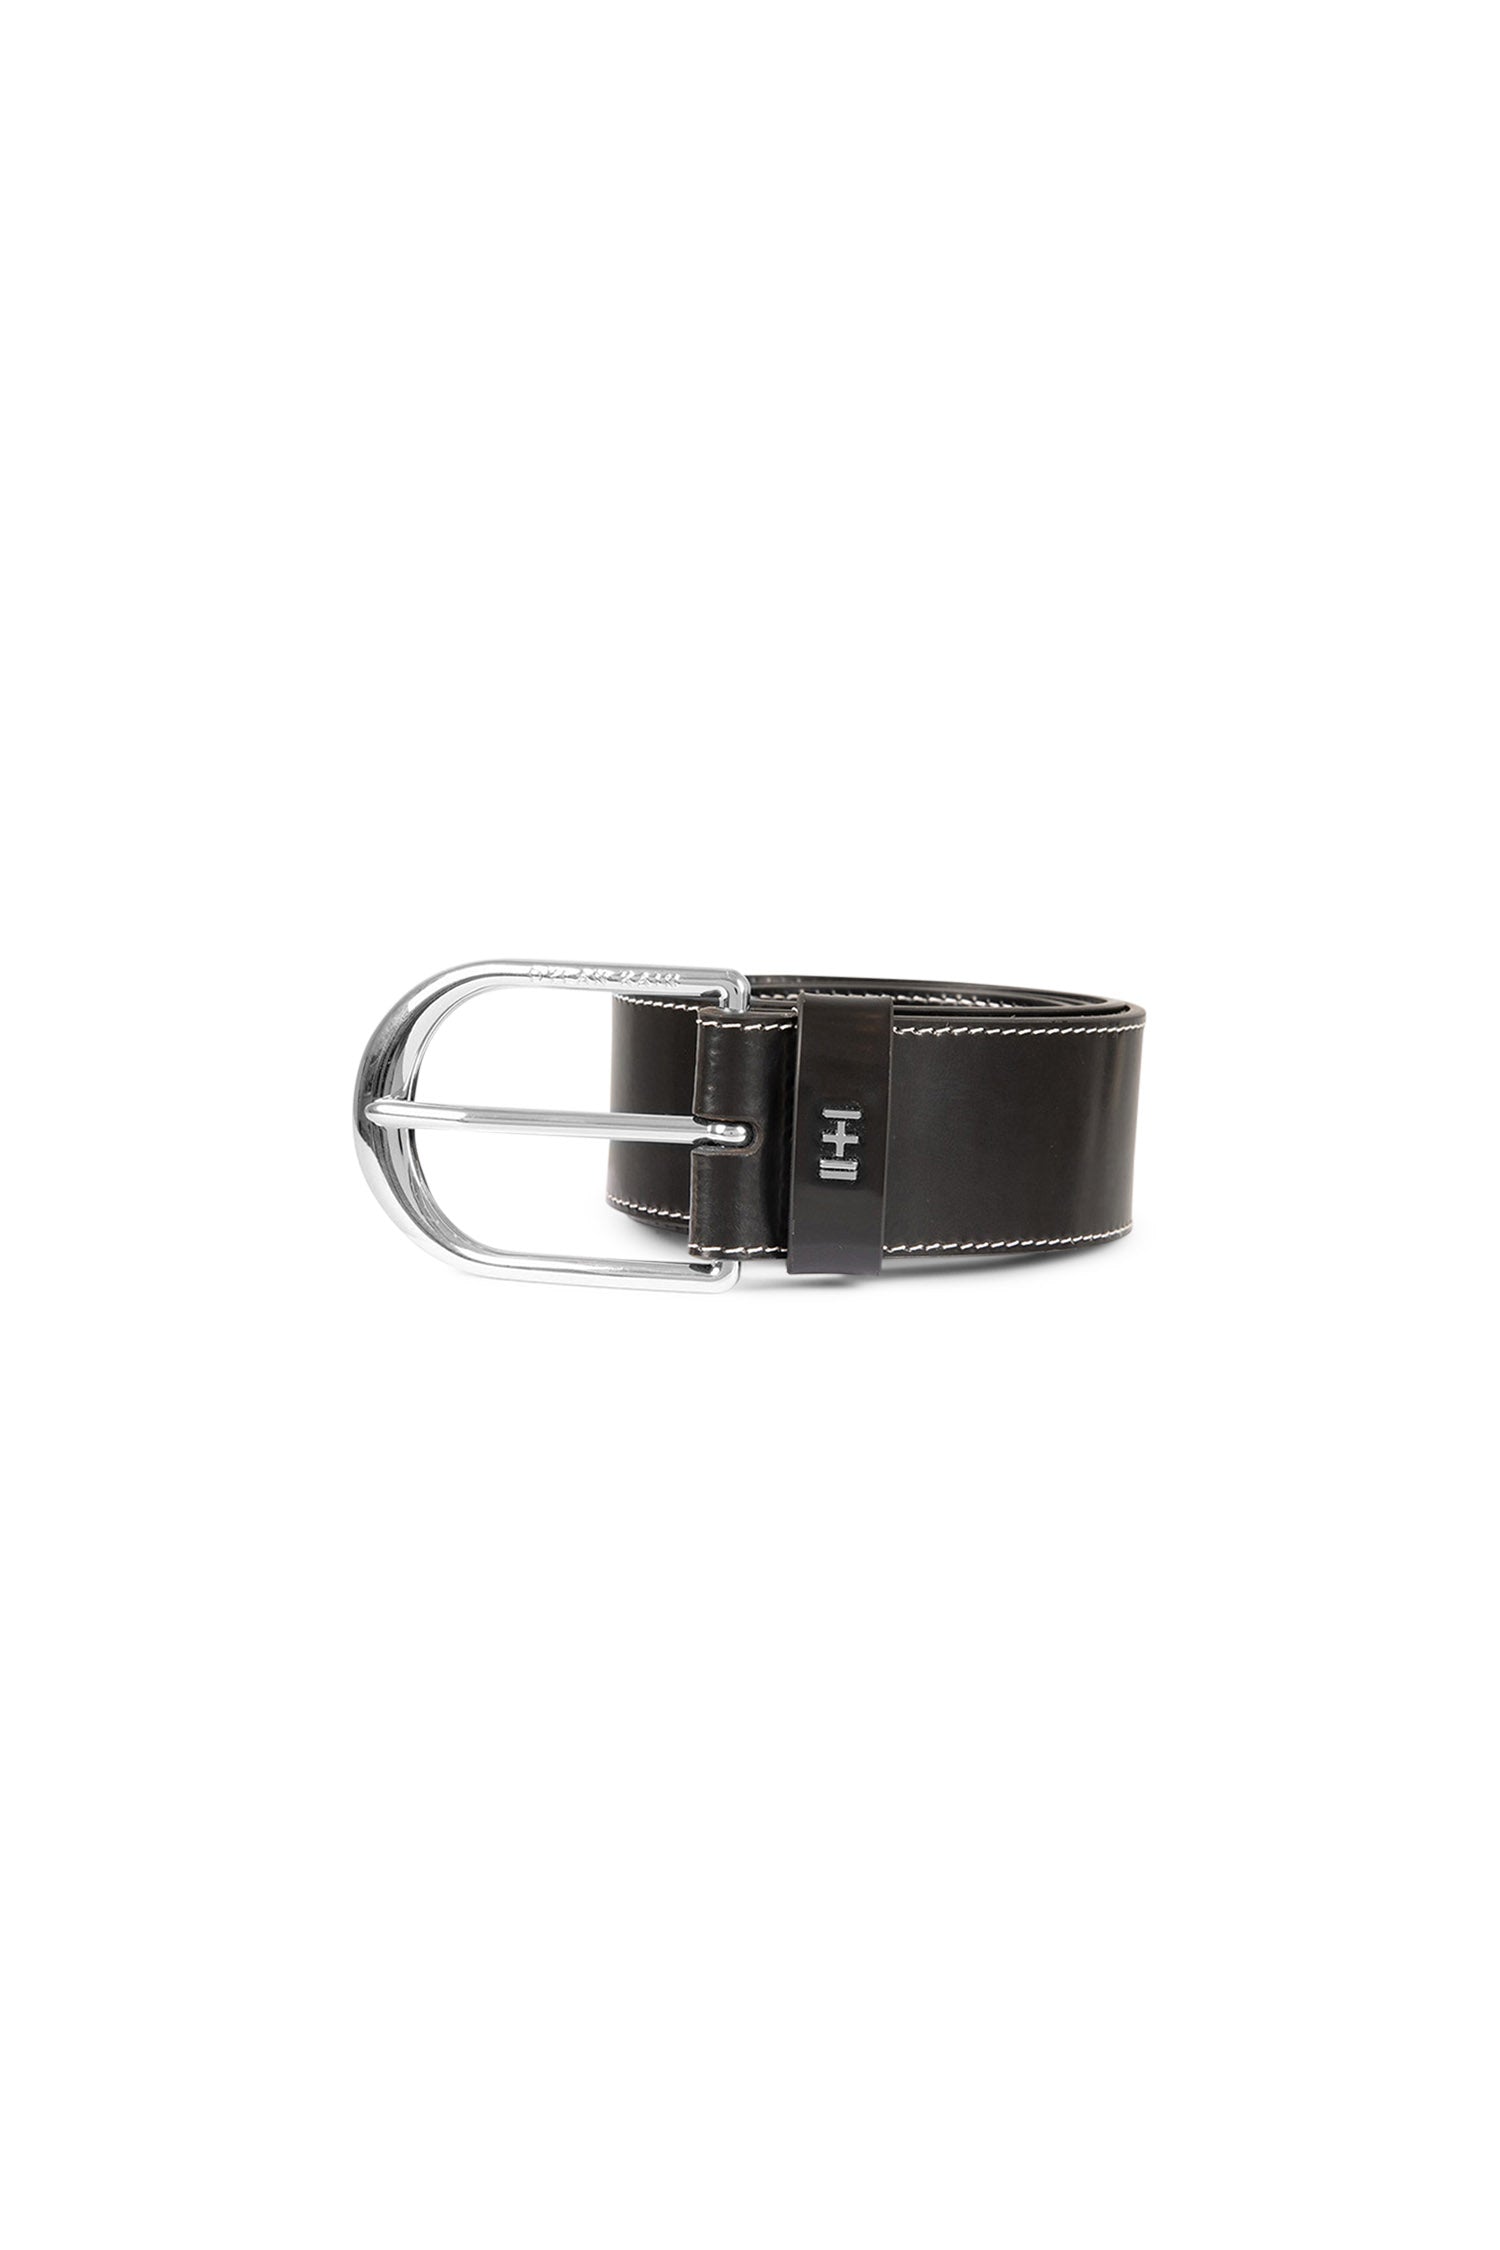 The Nika Lux Belt Silver - Gift Edit